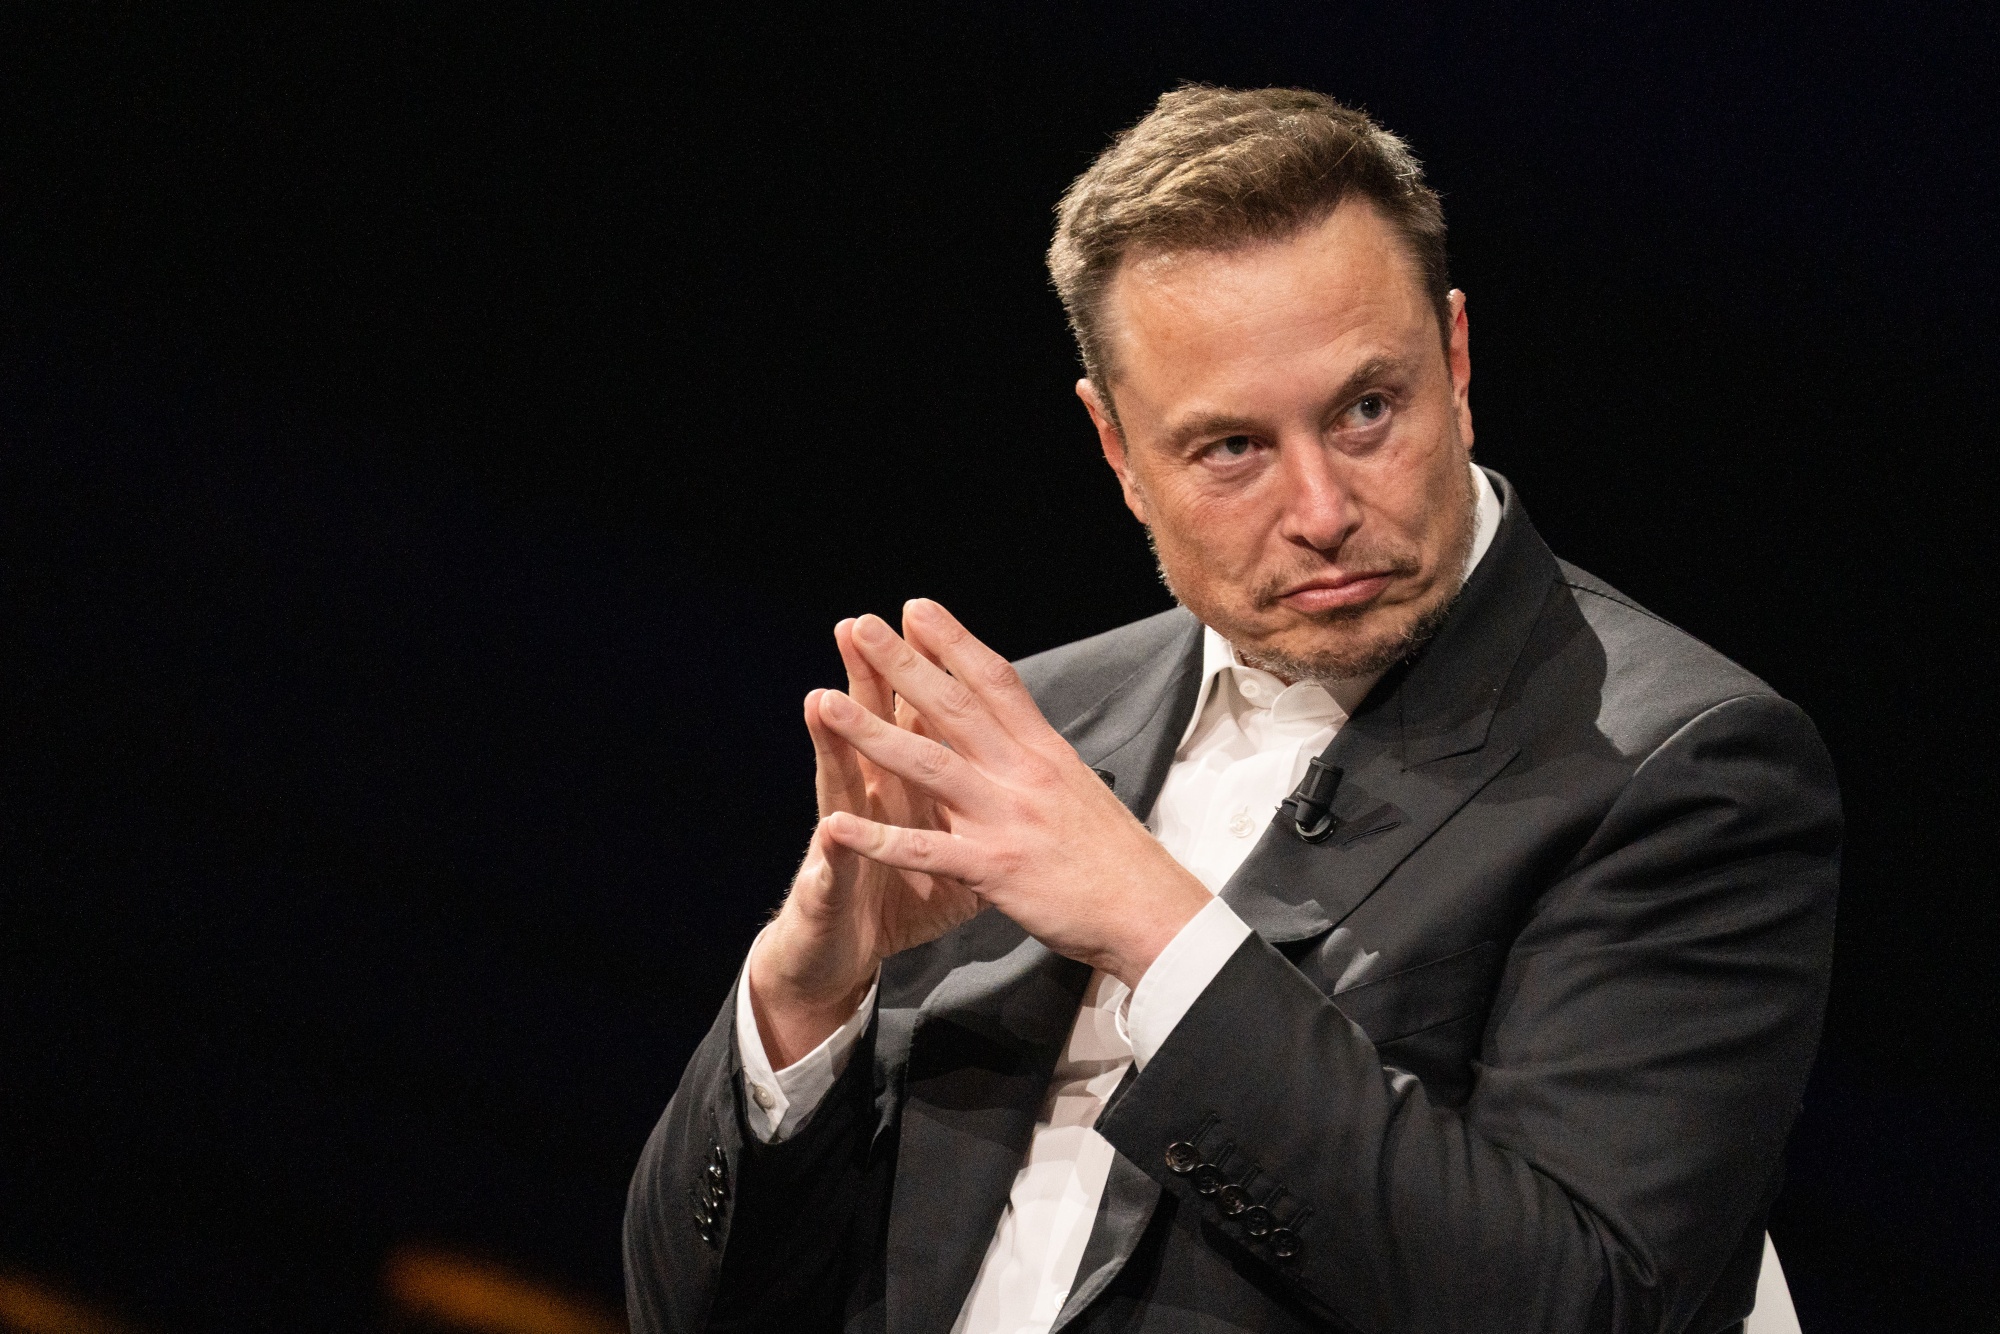 Musk-Zuckerberg: Tesla Is Losing the Magnificent Seven Cage Fight